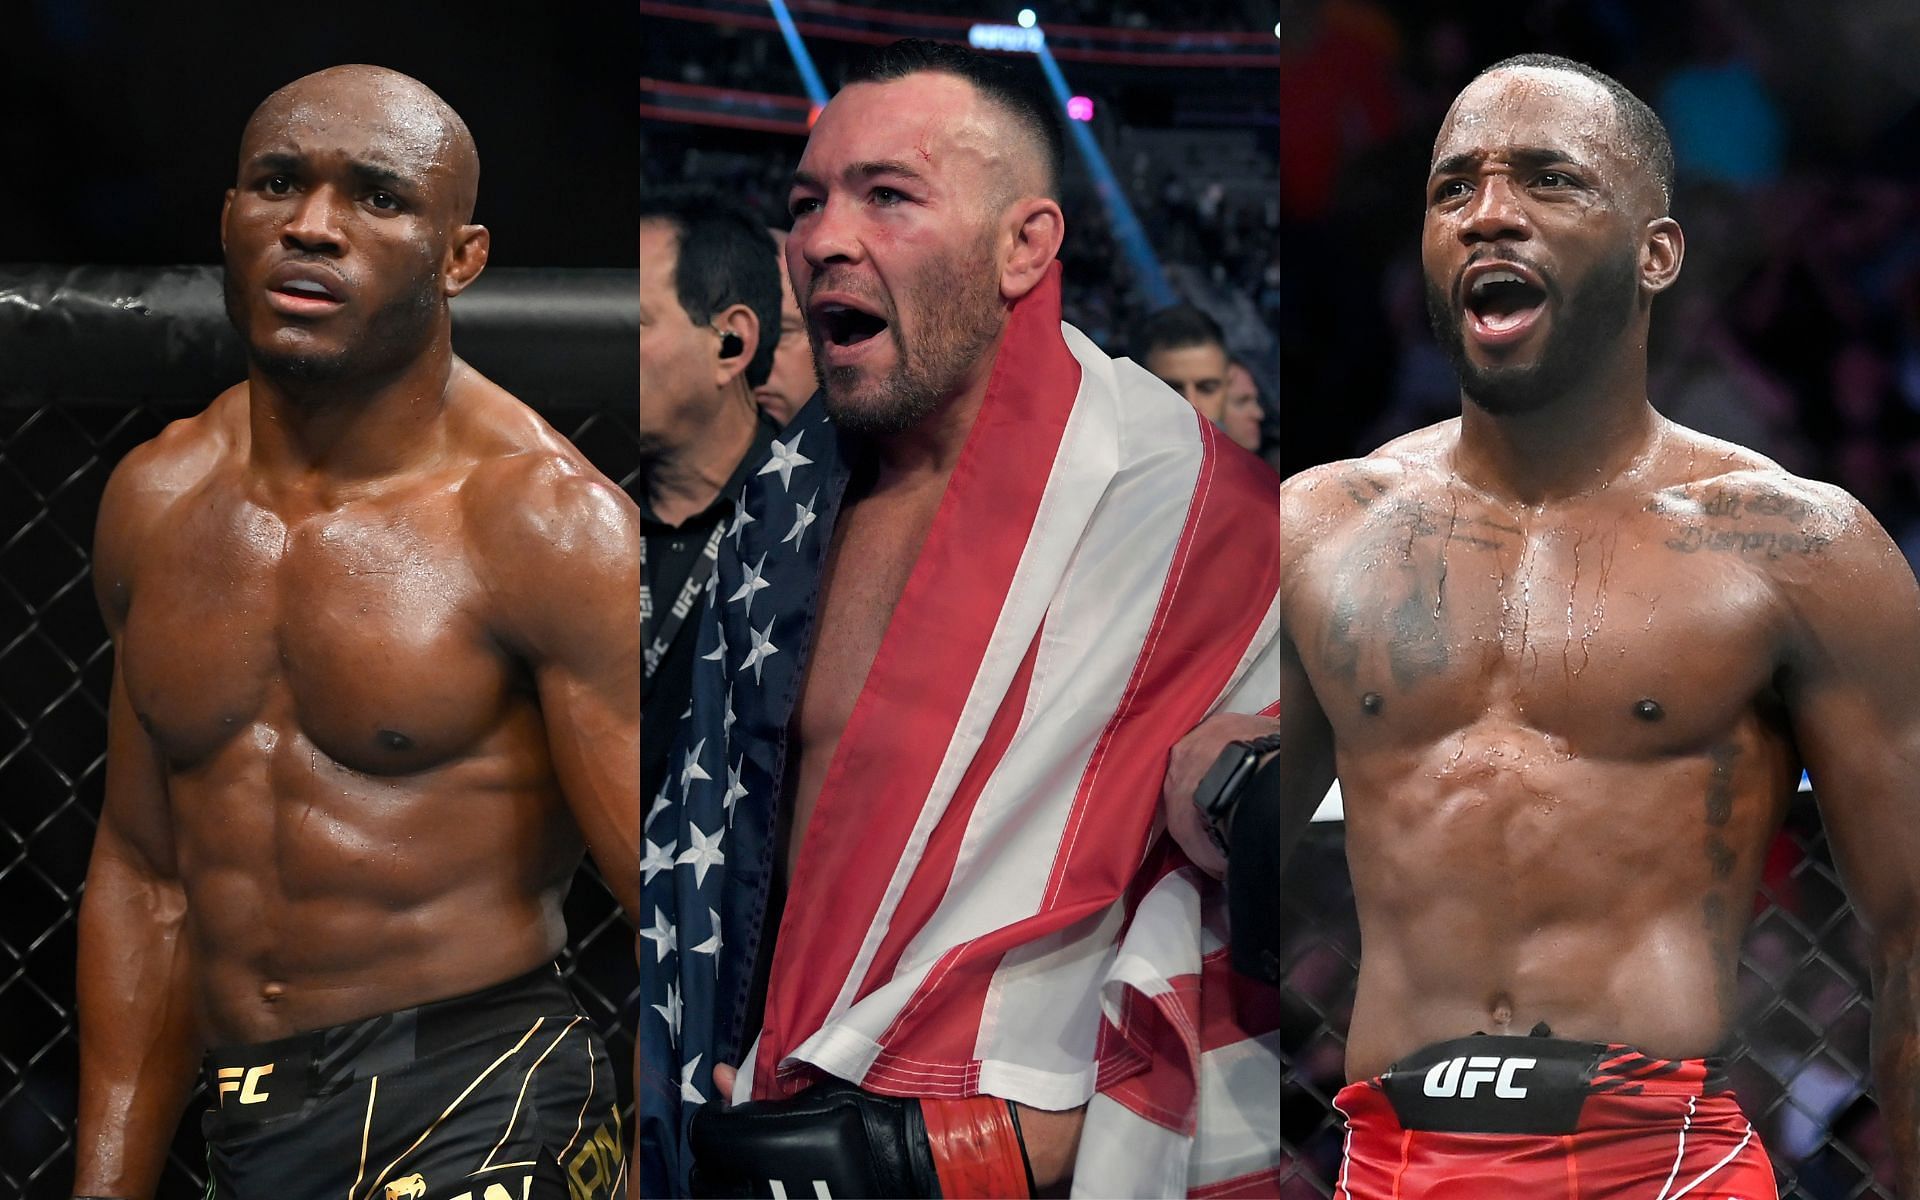 Kamaru Usman (left), Colby Covington (middle), and Leon Edwards (right) [Images courtesy: Getty Images]